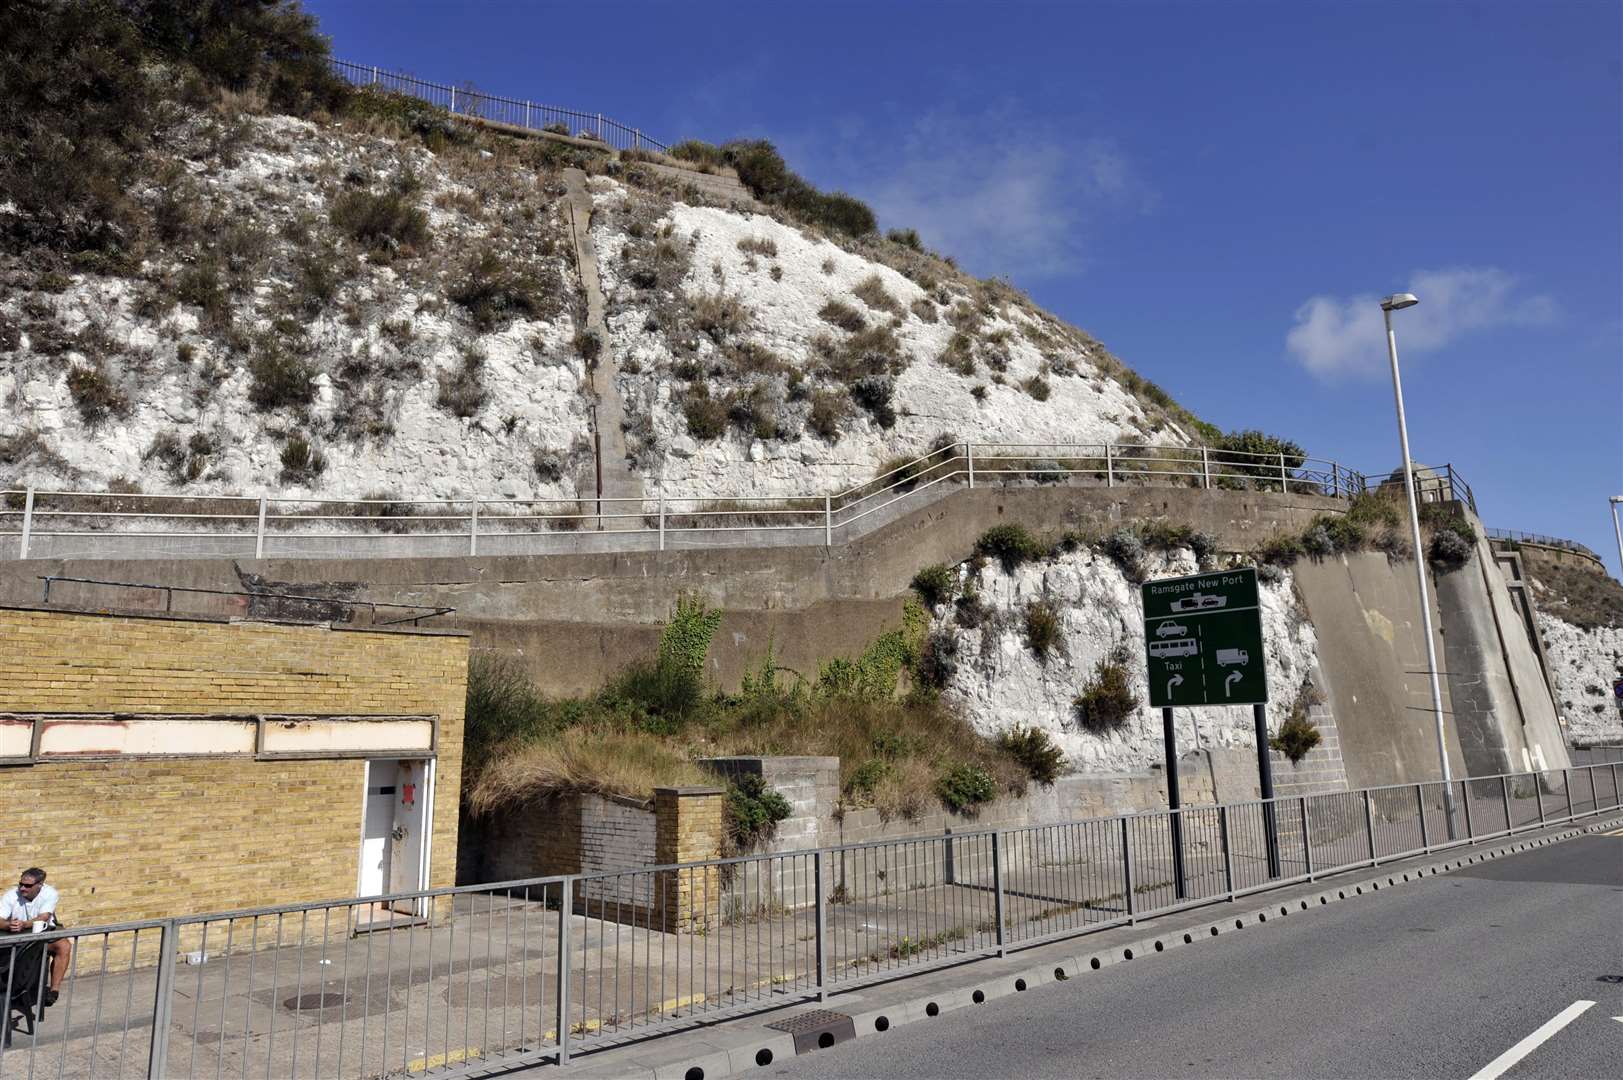 The Western Undercliff